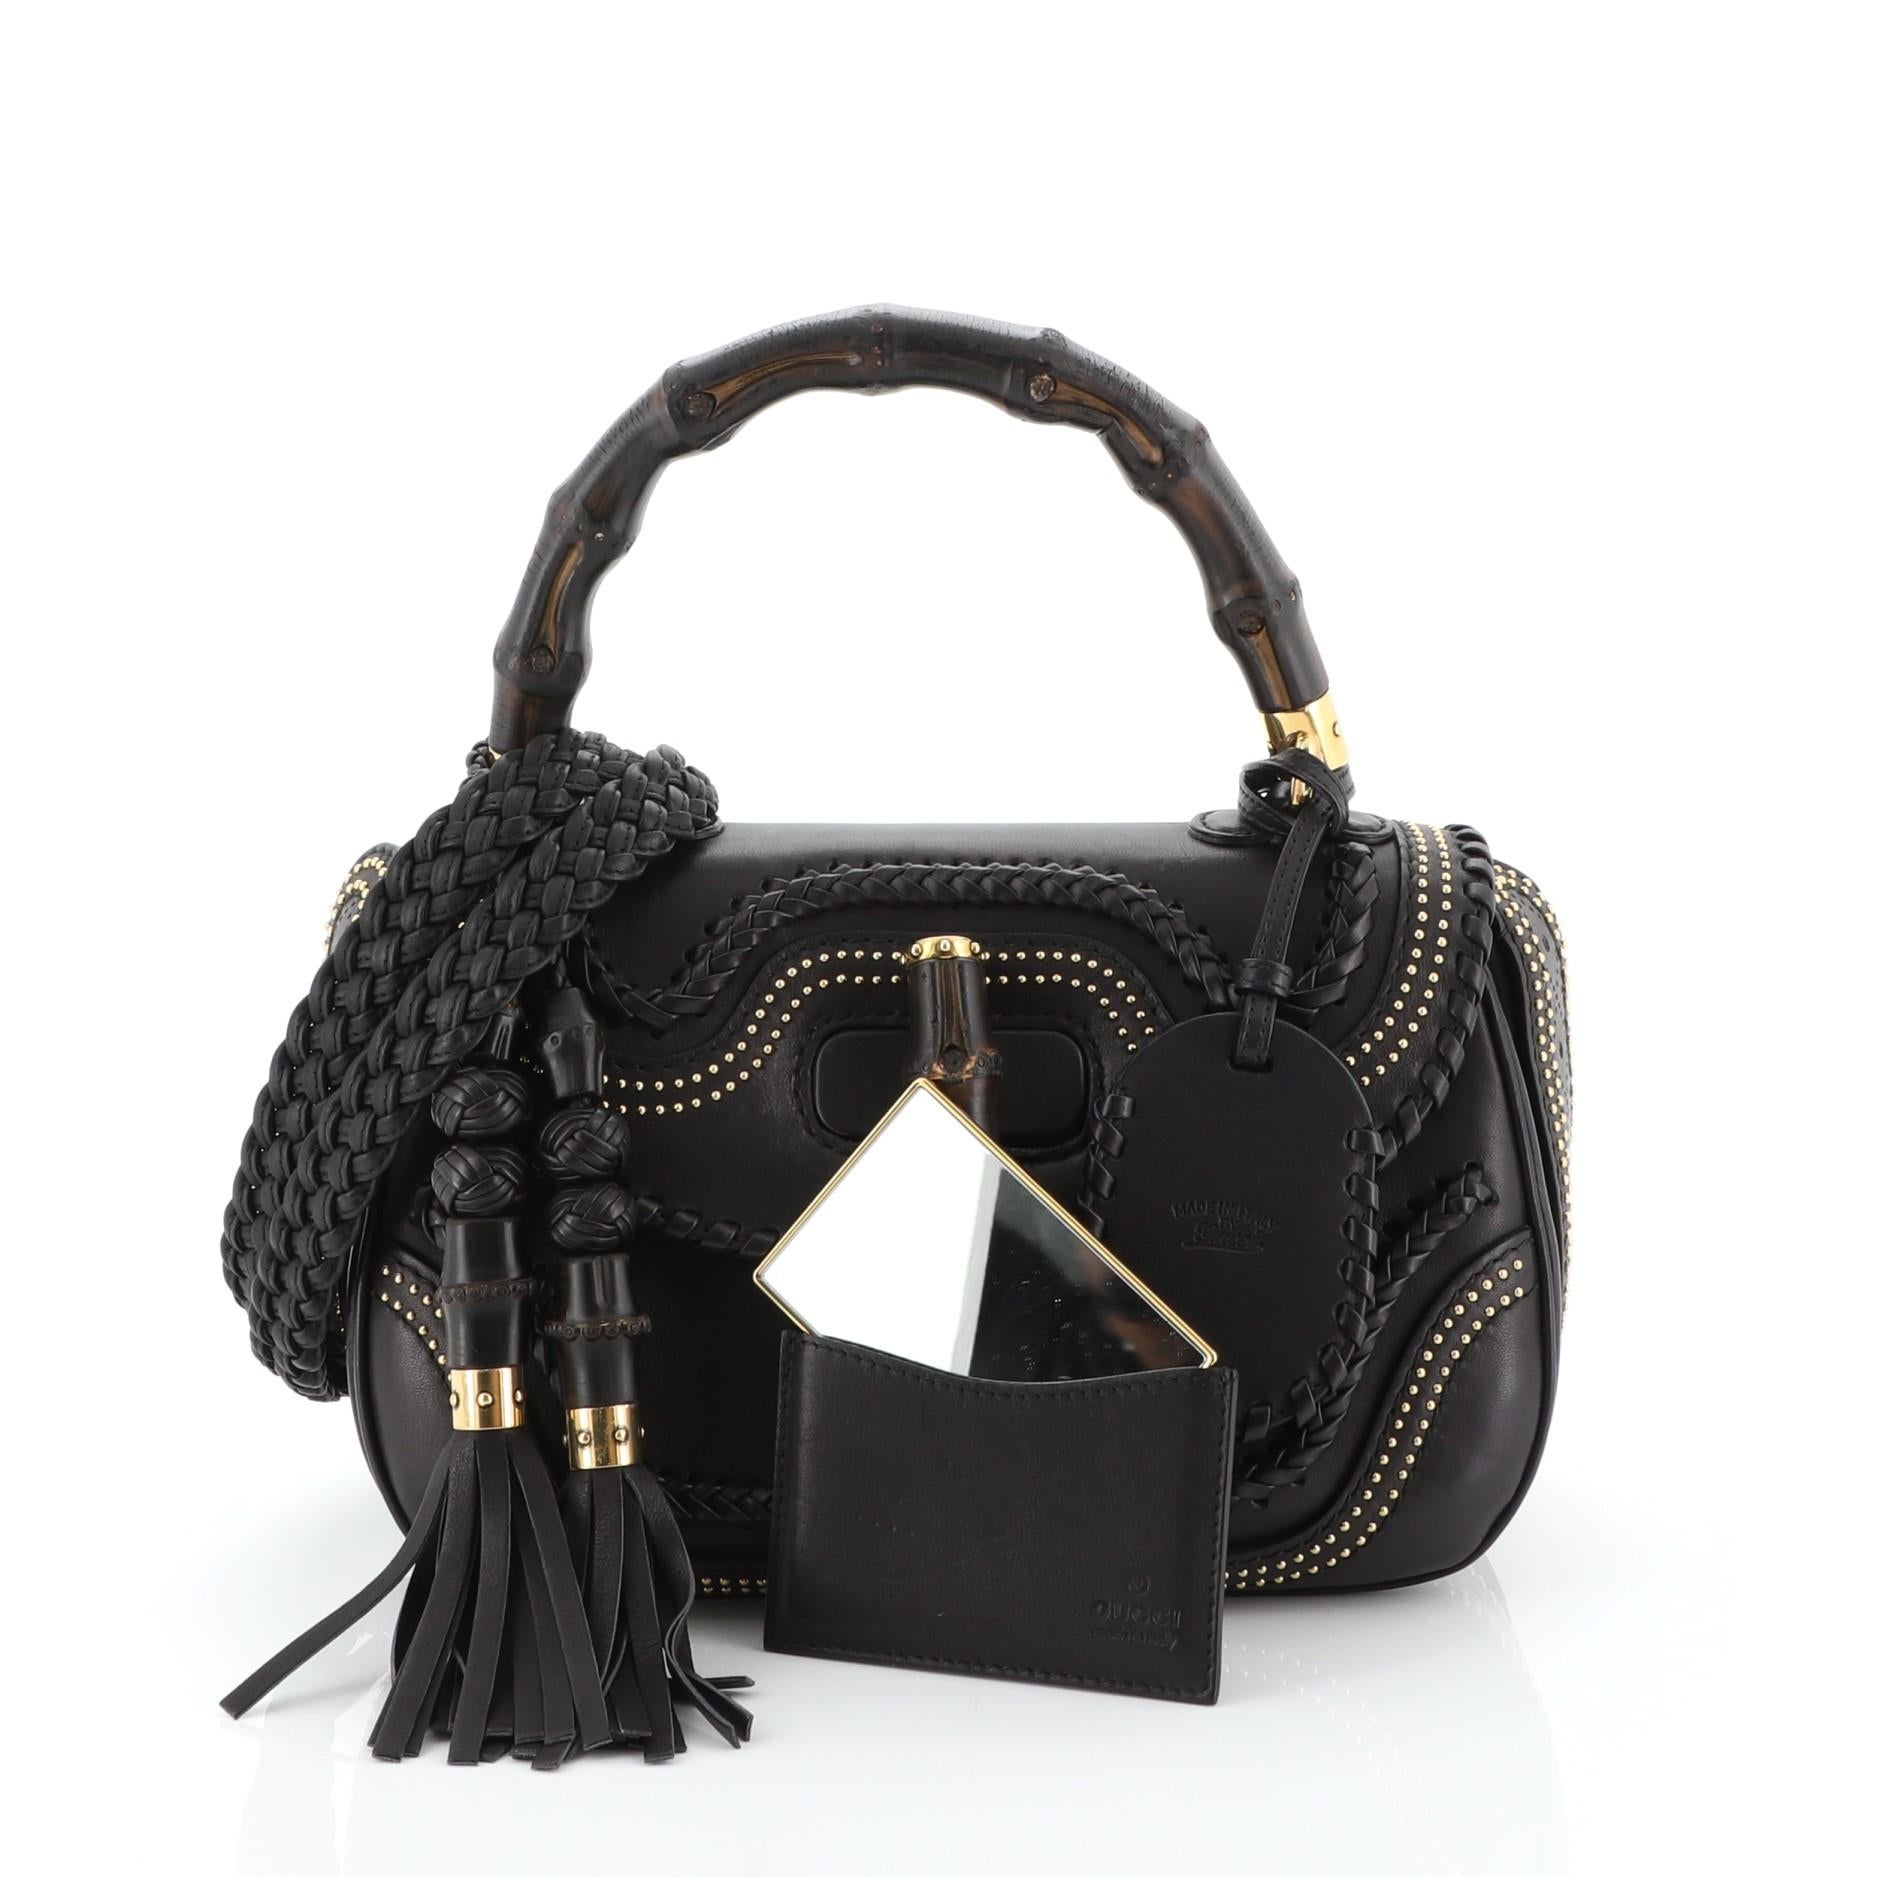 This Gucci New Bamboo Top Handle Bag Studded Leather Medium, crafted in black leather, features a looped bamboo top handle, detachable woven shoulder strap, bamboo turn-lock closure, whipstitched and stud detailing and gold-tone hardware. Its